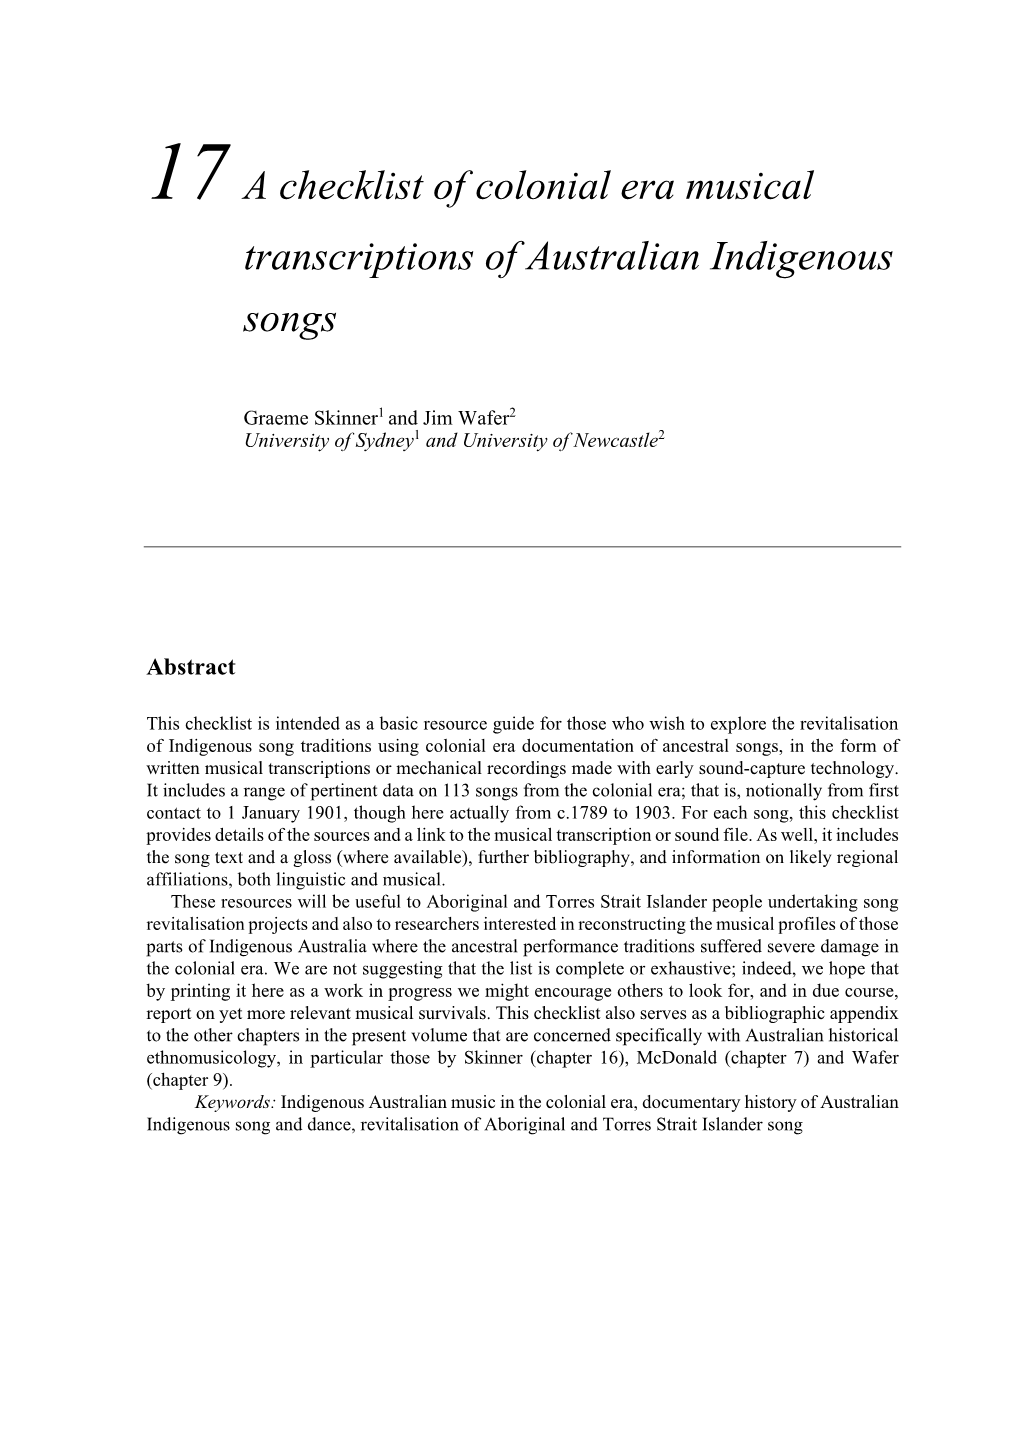 17 a Checklist of Colonial Era Musical Transcriptions of Australian Indigenous Songs